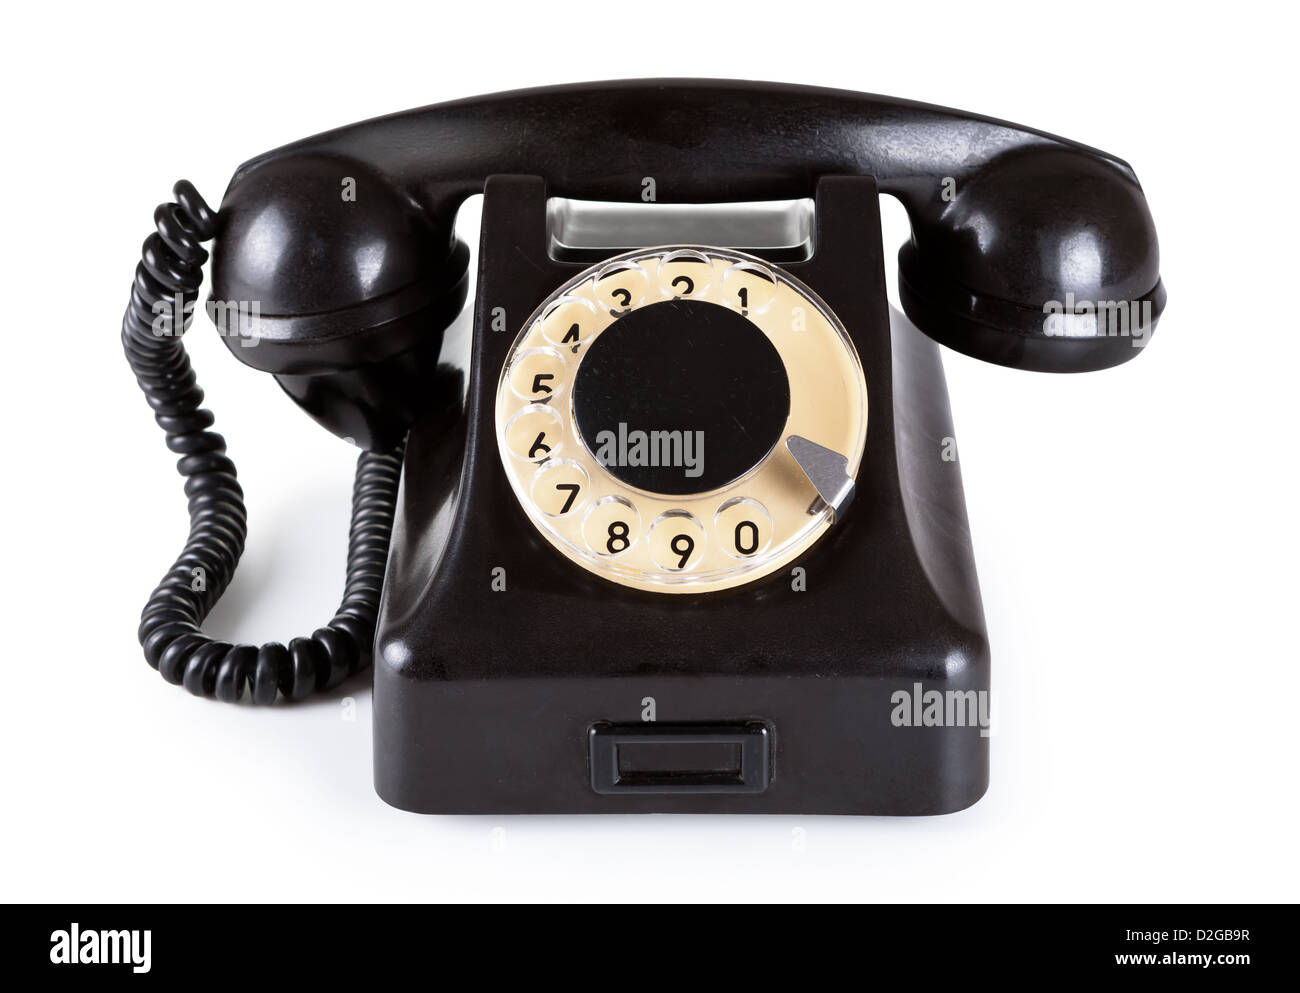 Old black vintage telephone with rotary dial on white background Stock Photo